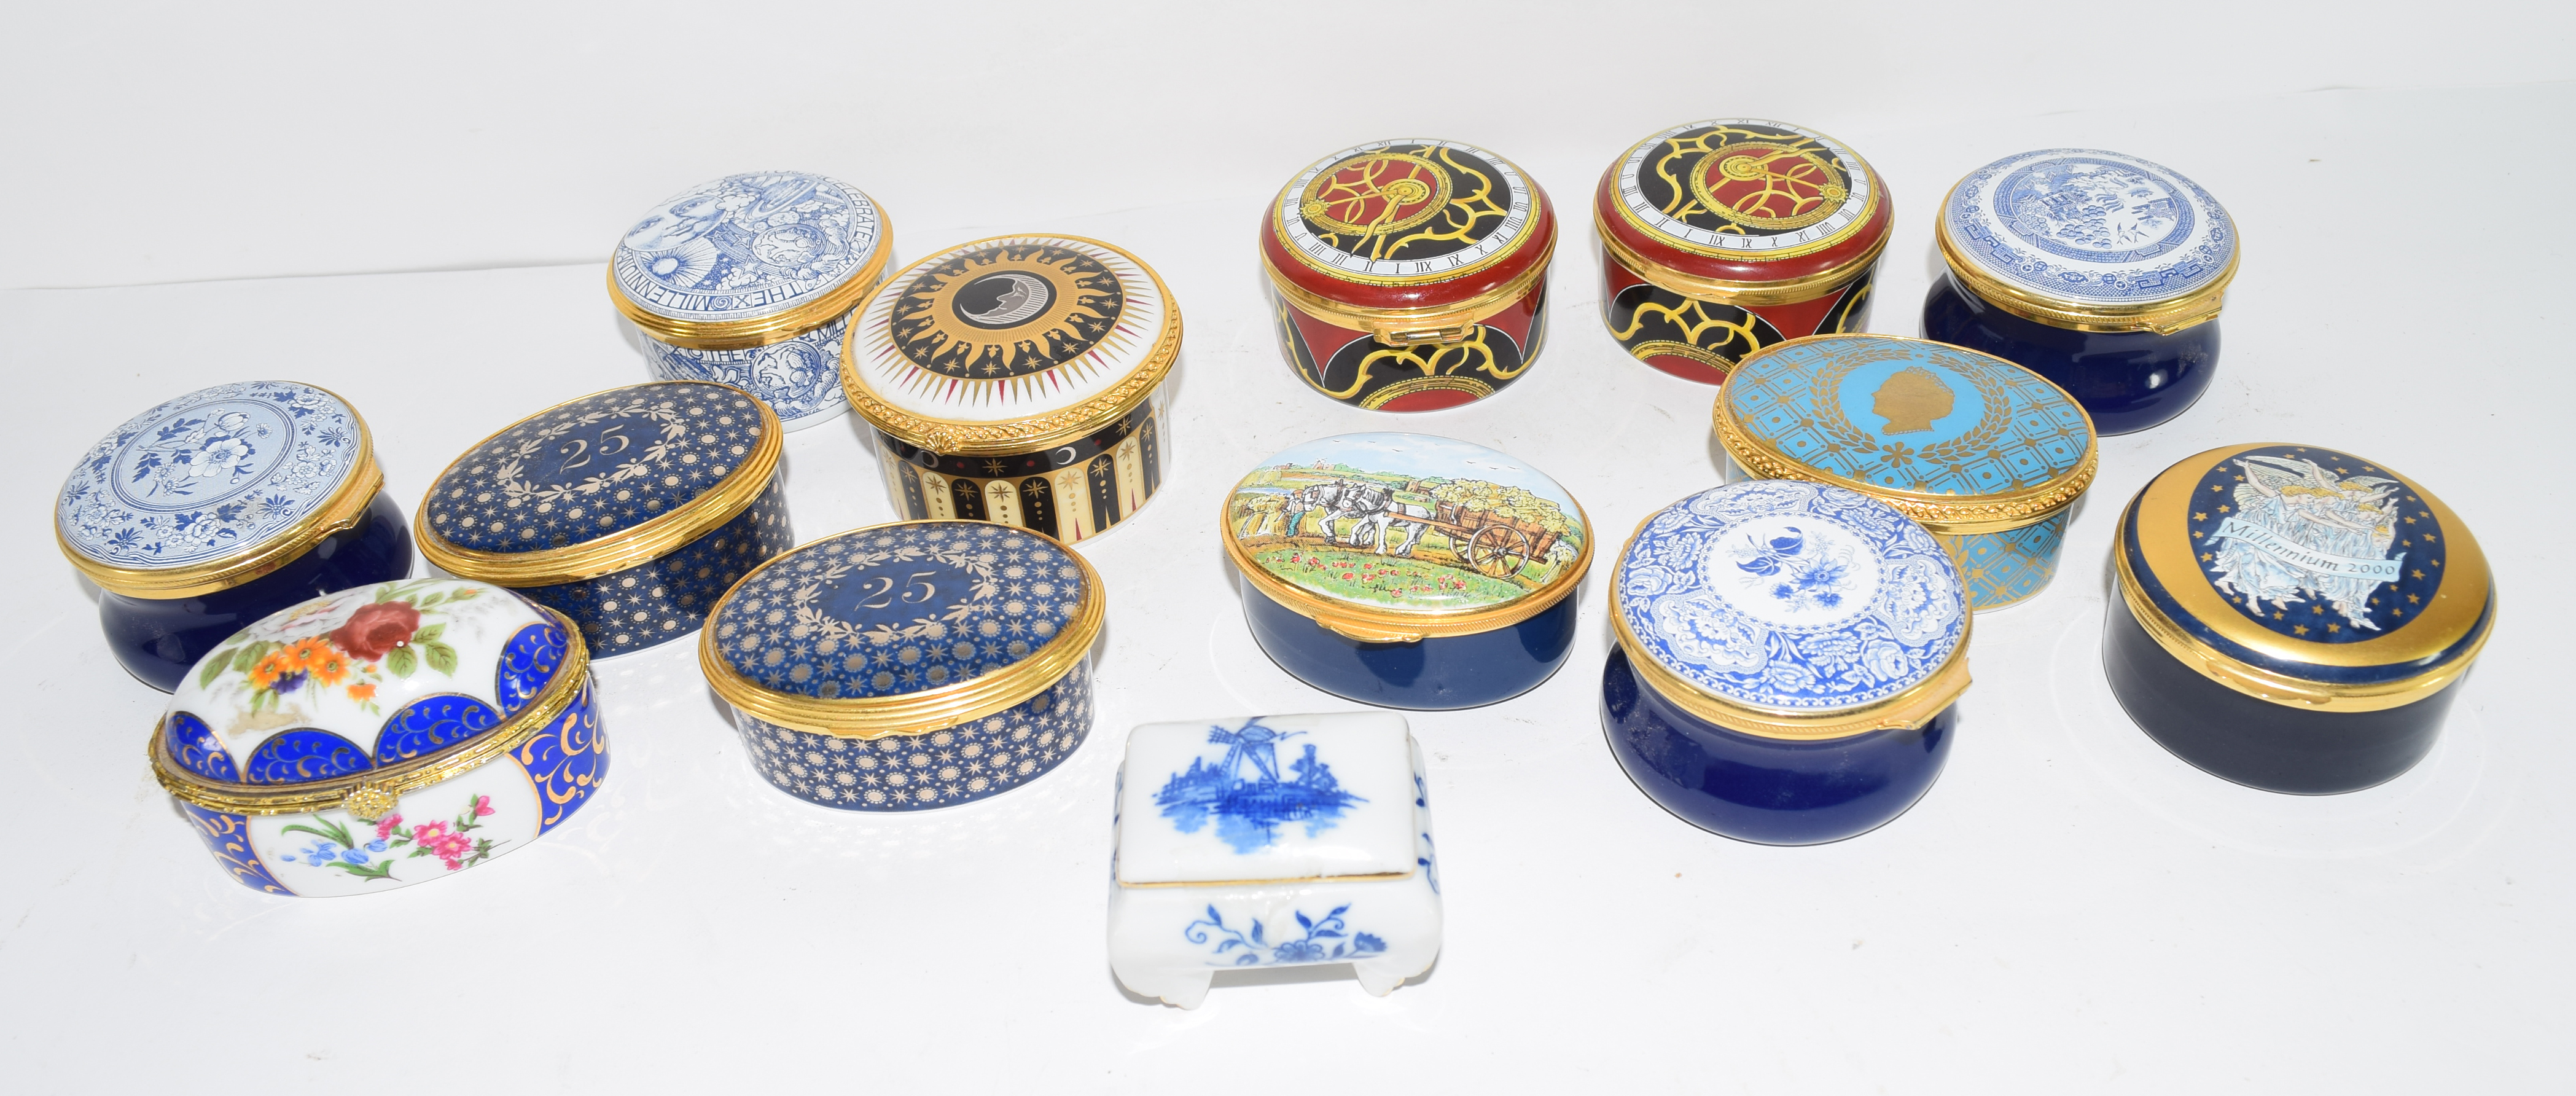 Group of 14 patch boxes, some by Spode and other makers, mainly English and French, some also